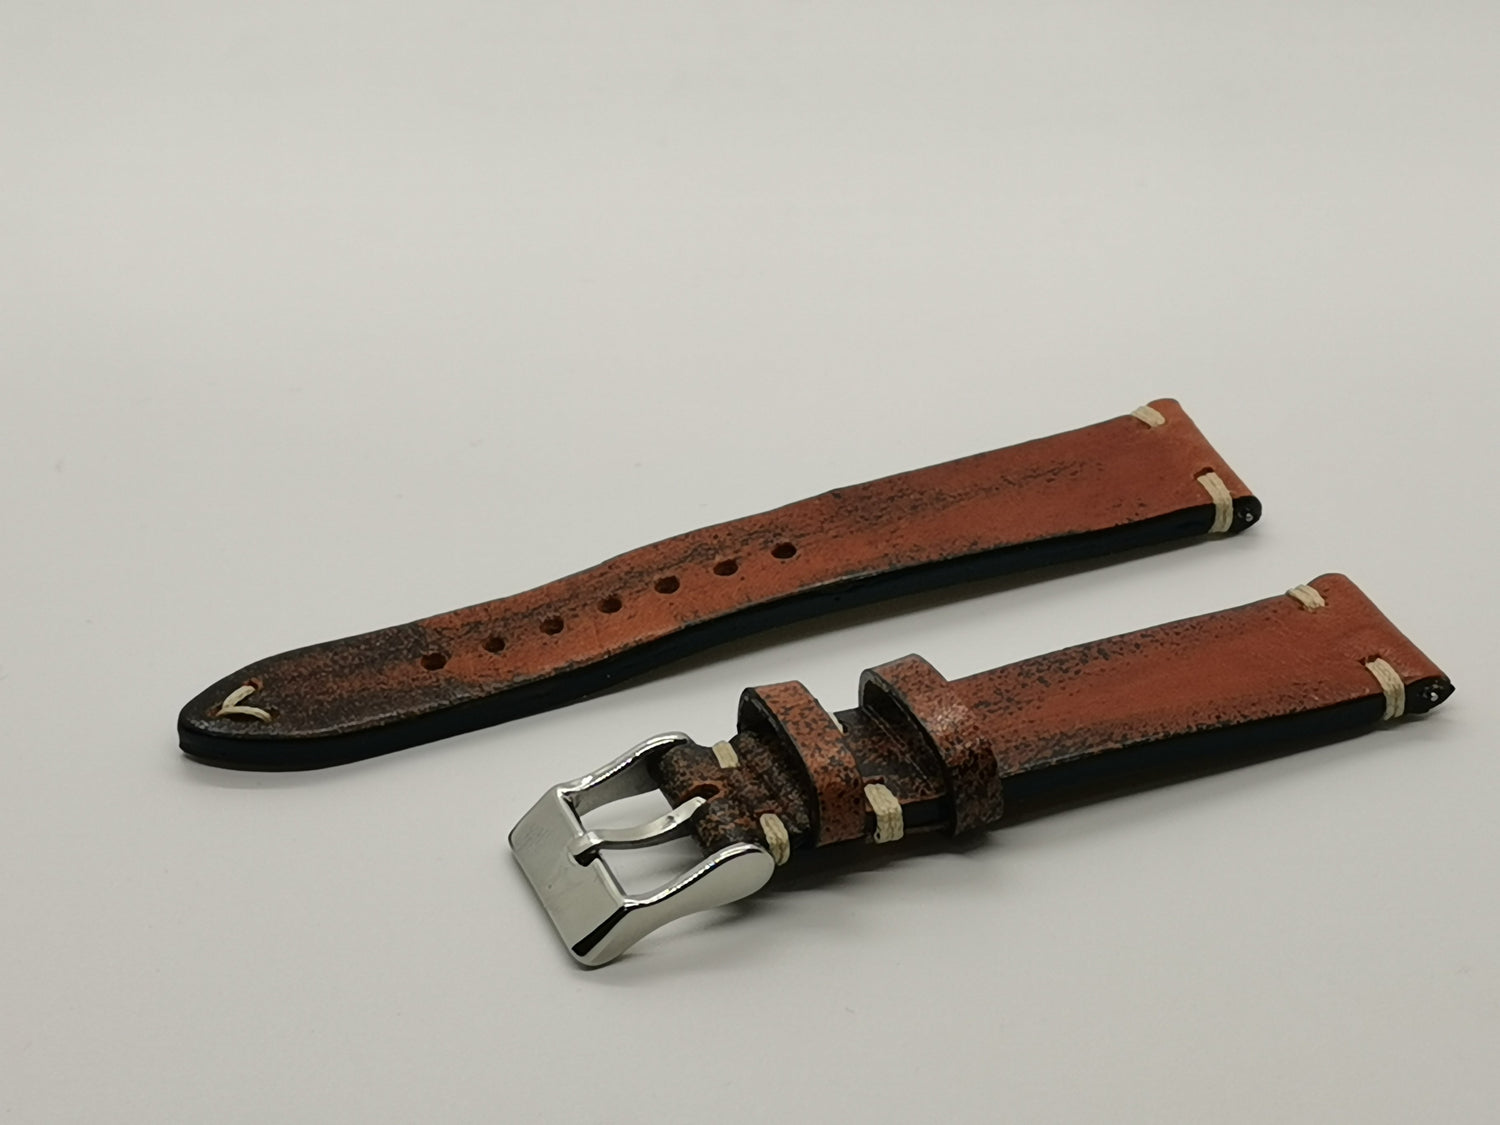 Geniune Leather Watch Straps Replacements - The Shocking Truth!